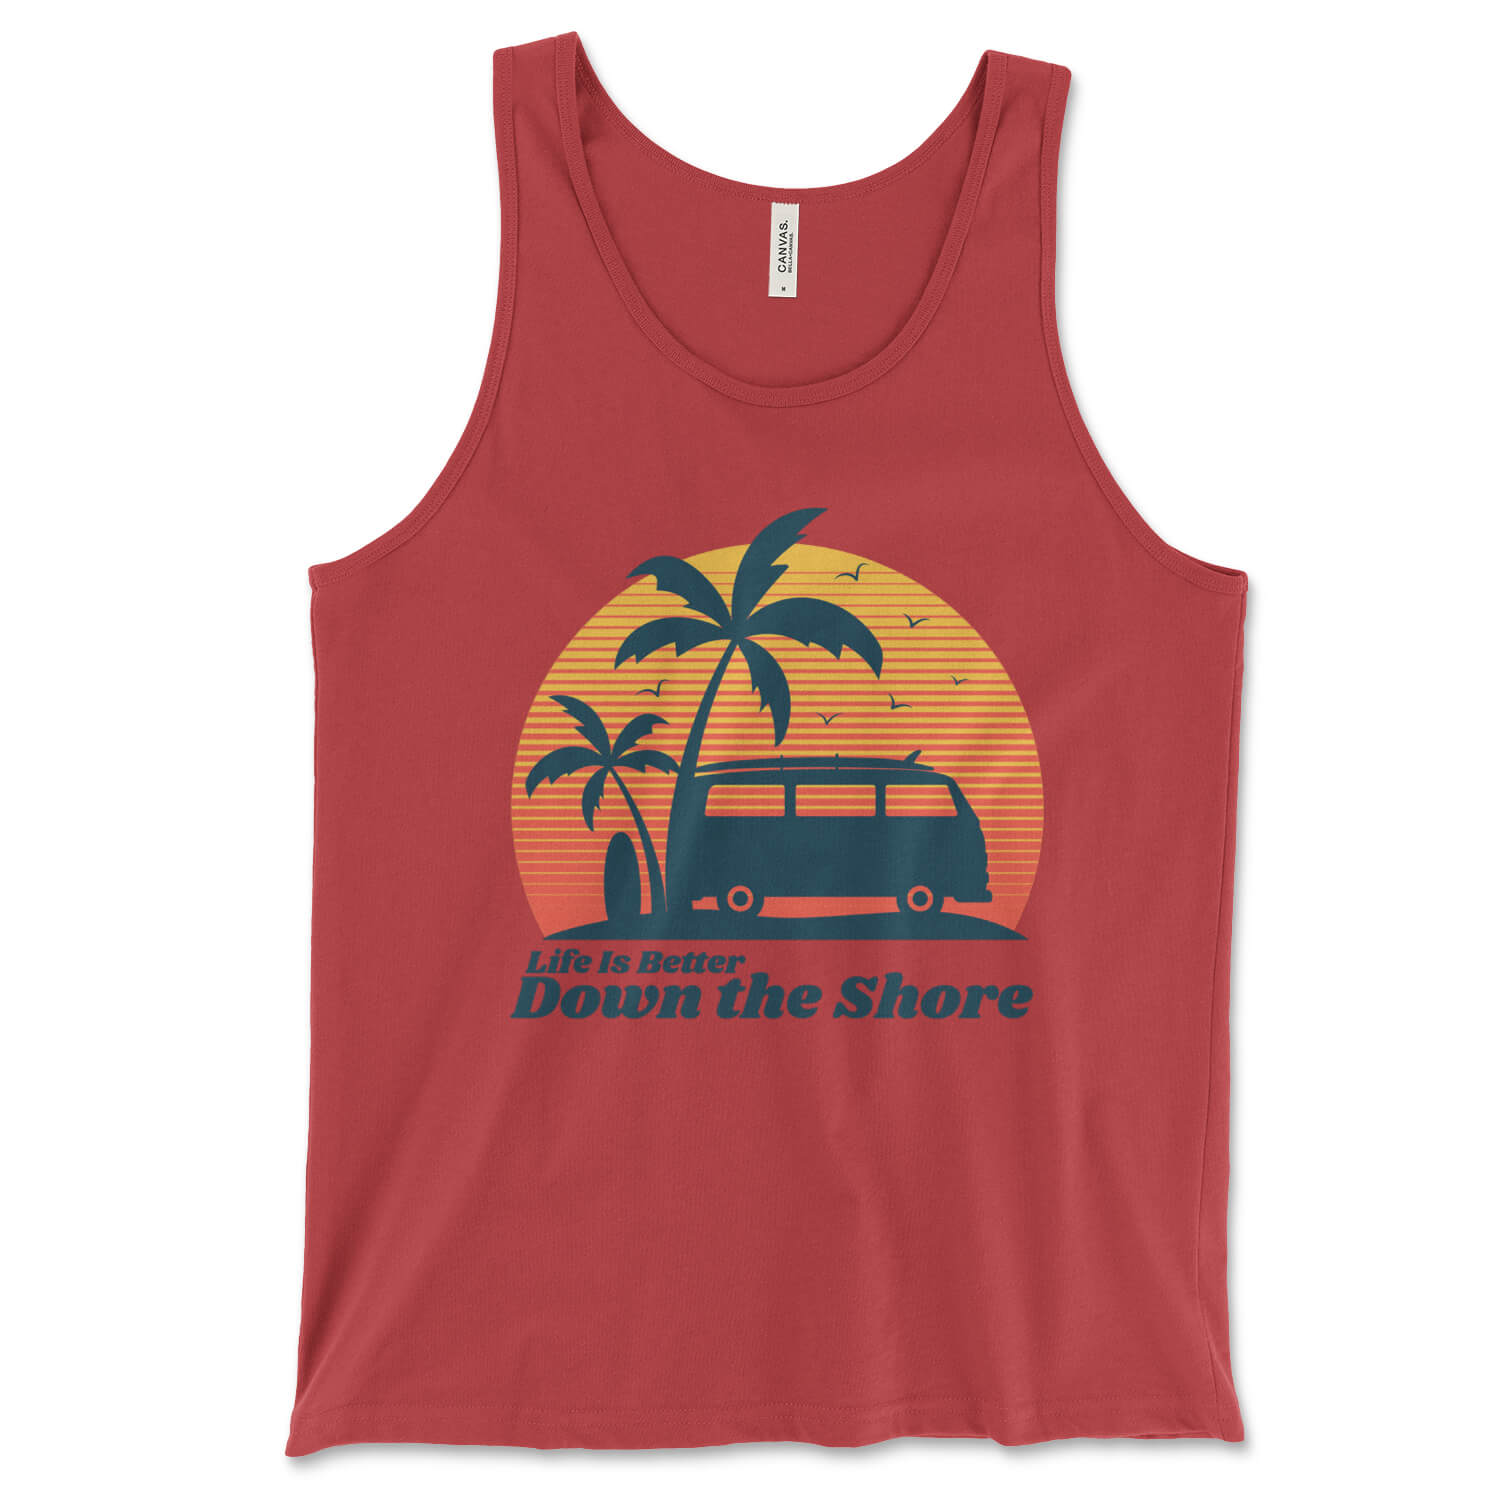 Life is better down the jersey shore red tank top from Phillygoat